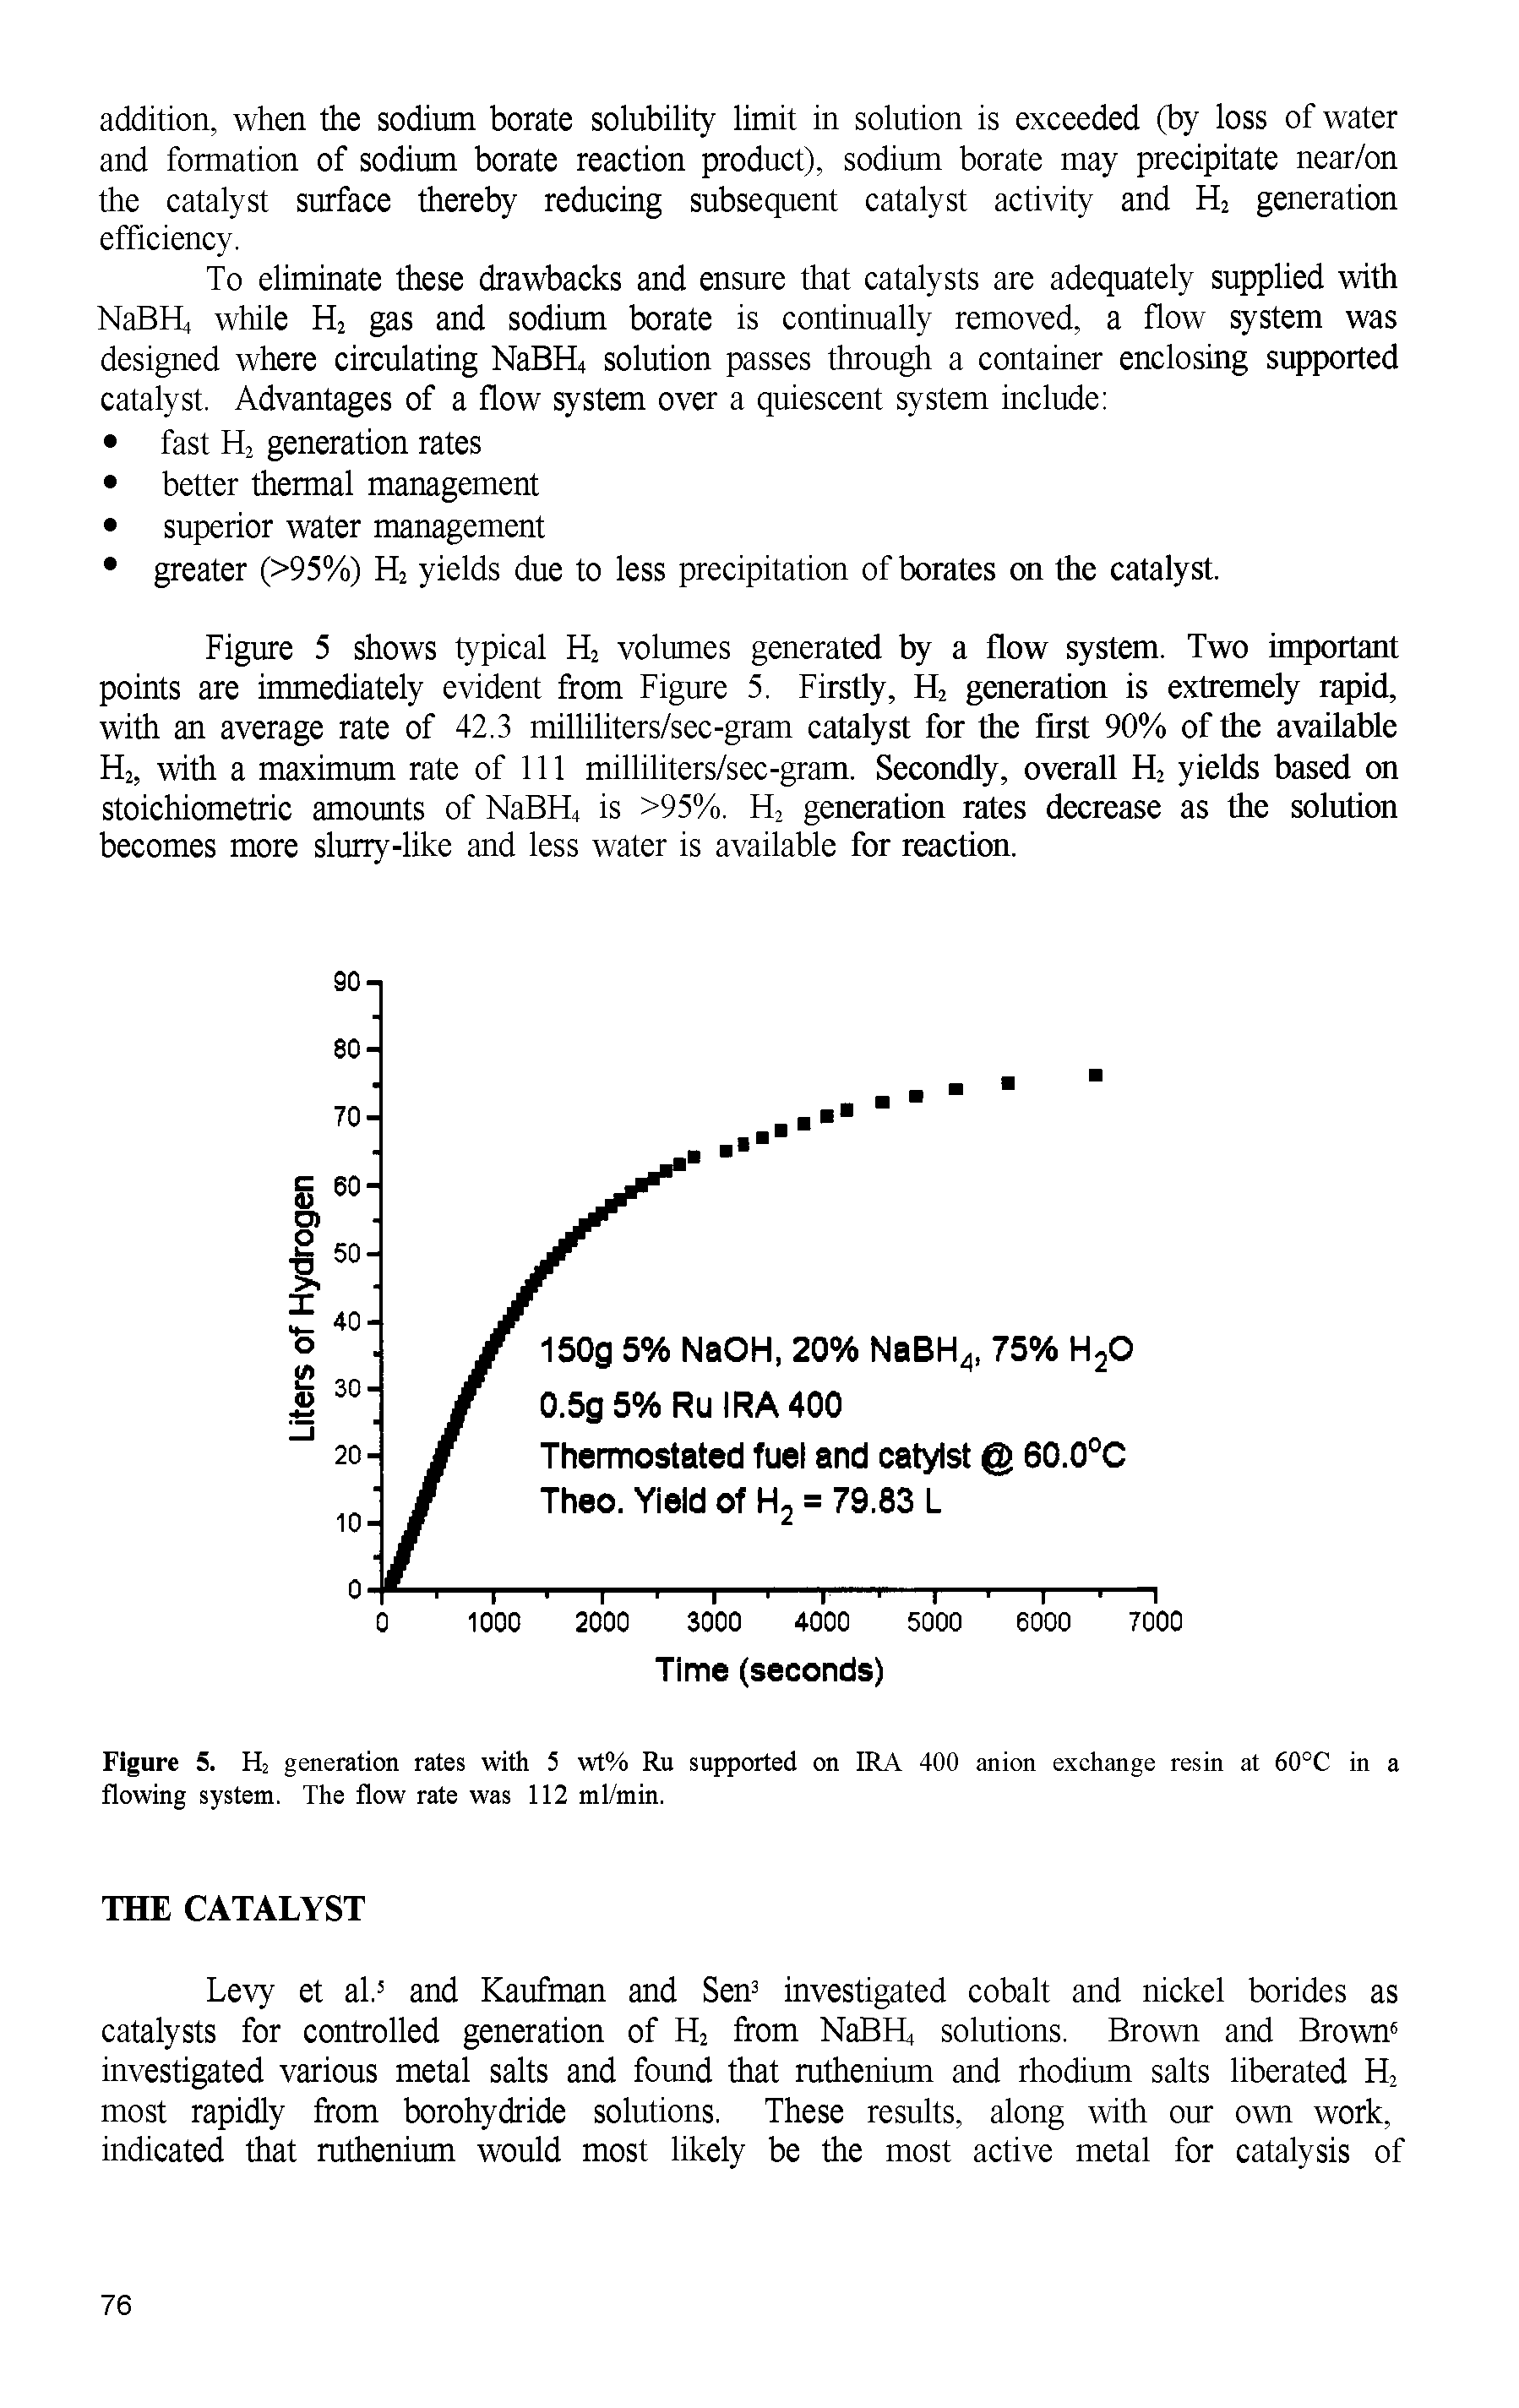 Figure 5 shows typical H2 volumes generated by a flow system. Two important points are immediately evident from Figure 5. Firstly, H2 generation is extremely rapid, with an average rate of 42.3 milliliters/sec-gram catalyst for the first 90% of the available H2, with a maximum rate of 111 milliliters/sec-gram. Secondly, overall H2 yields based on stoichiometric amounts of NaBFL, is >95%. H2 generation rates decrease as the solution becomes more slurry-like and less water is available for reaction.